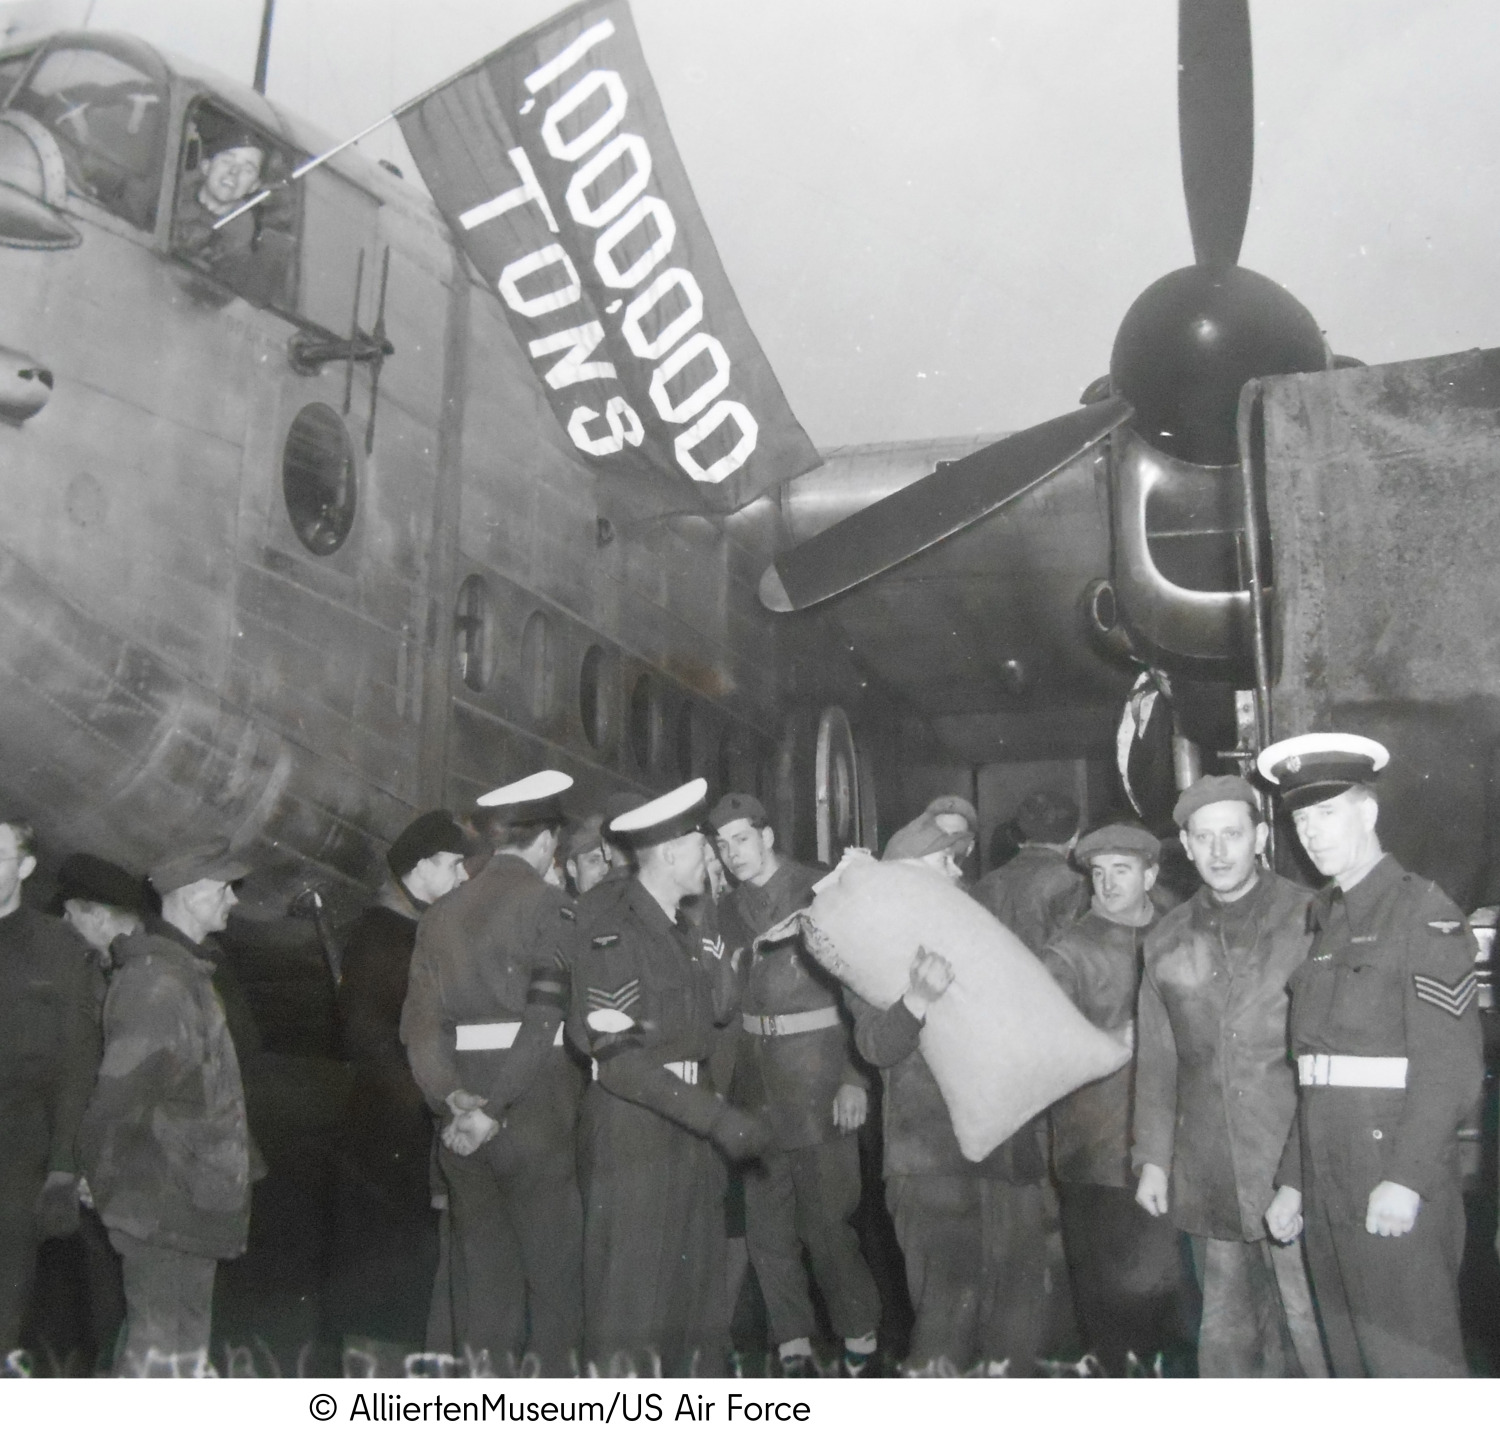 Various men in uniform stand in front of an airplane and carry sacks of groceries